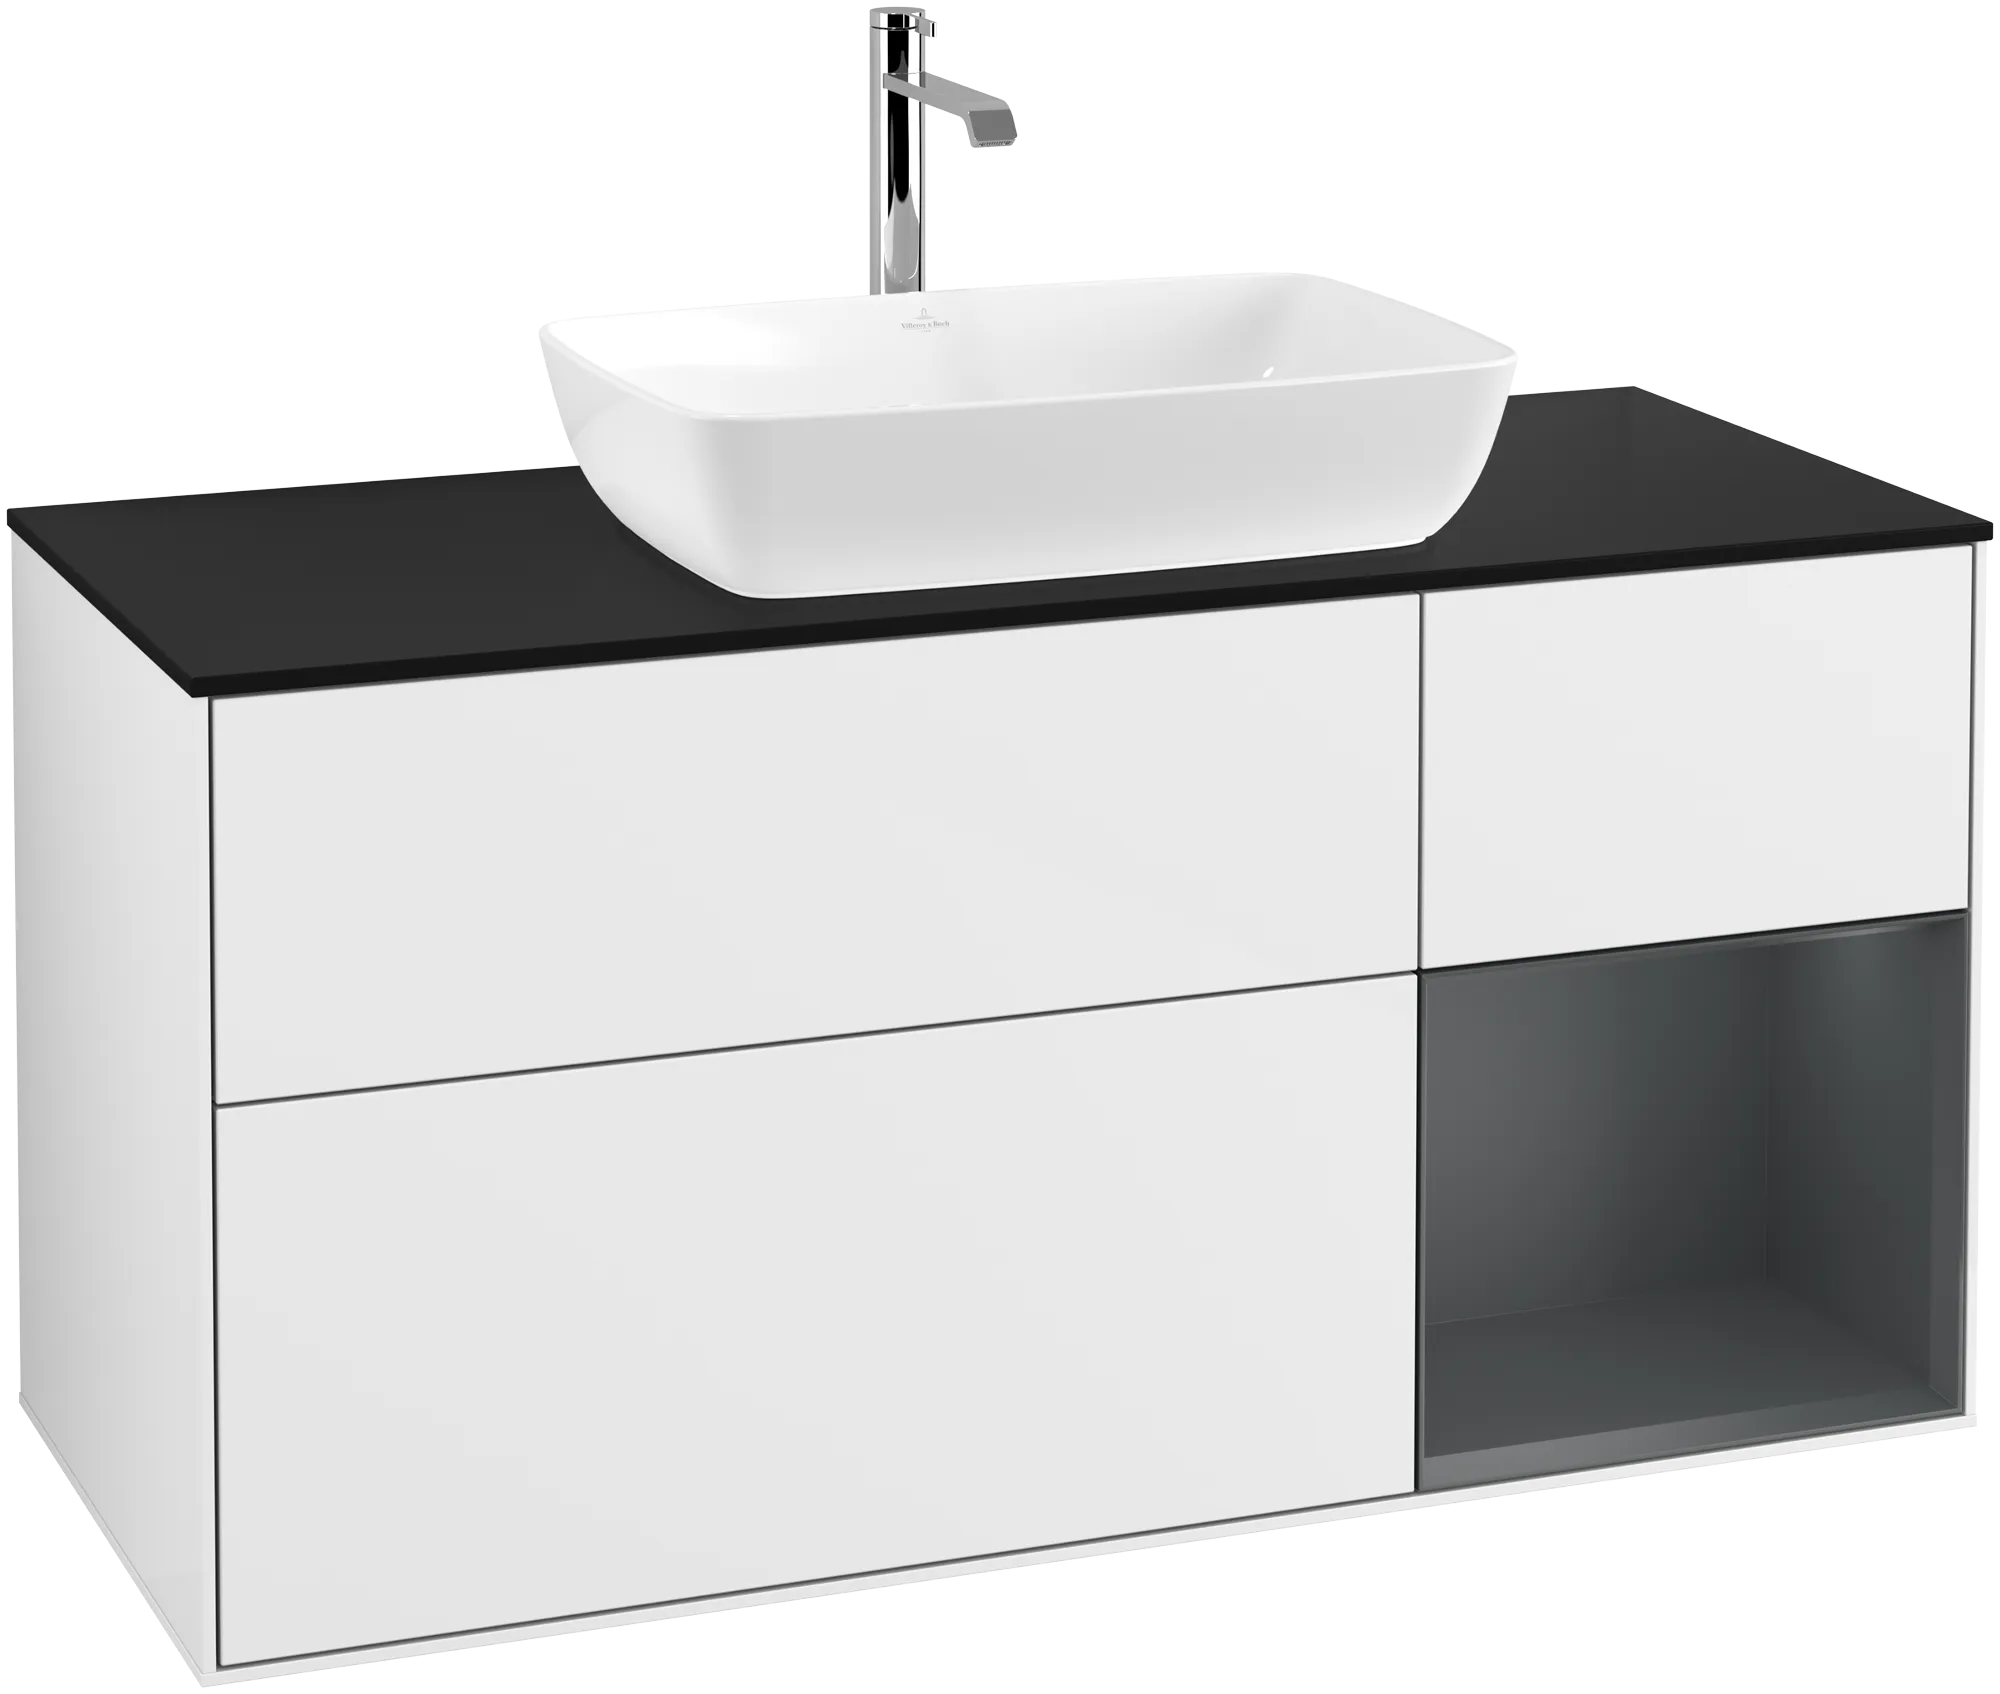 Obrázek VILLEROY BOCH Finion Vanity unit, with lighting, 3 pull-out compartments, 1200 x 603 x 501 mm, Glossy White Lacquer / Midnight Blue Matt Lacquer / Glass Black Matt #G832HGGF